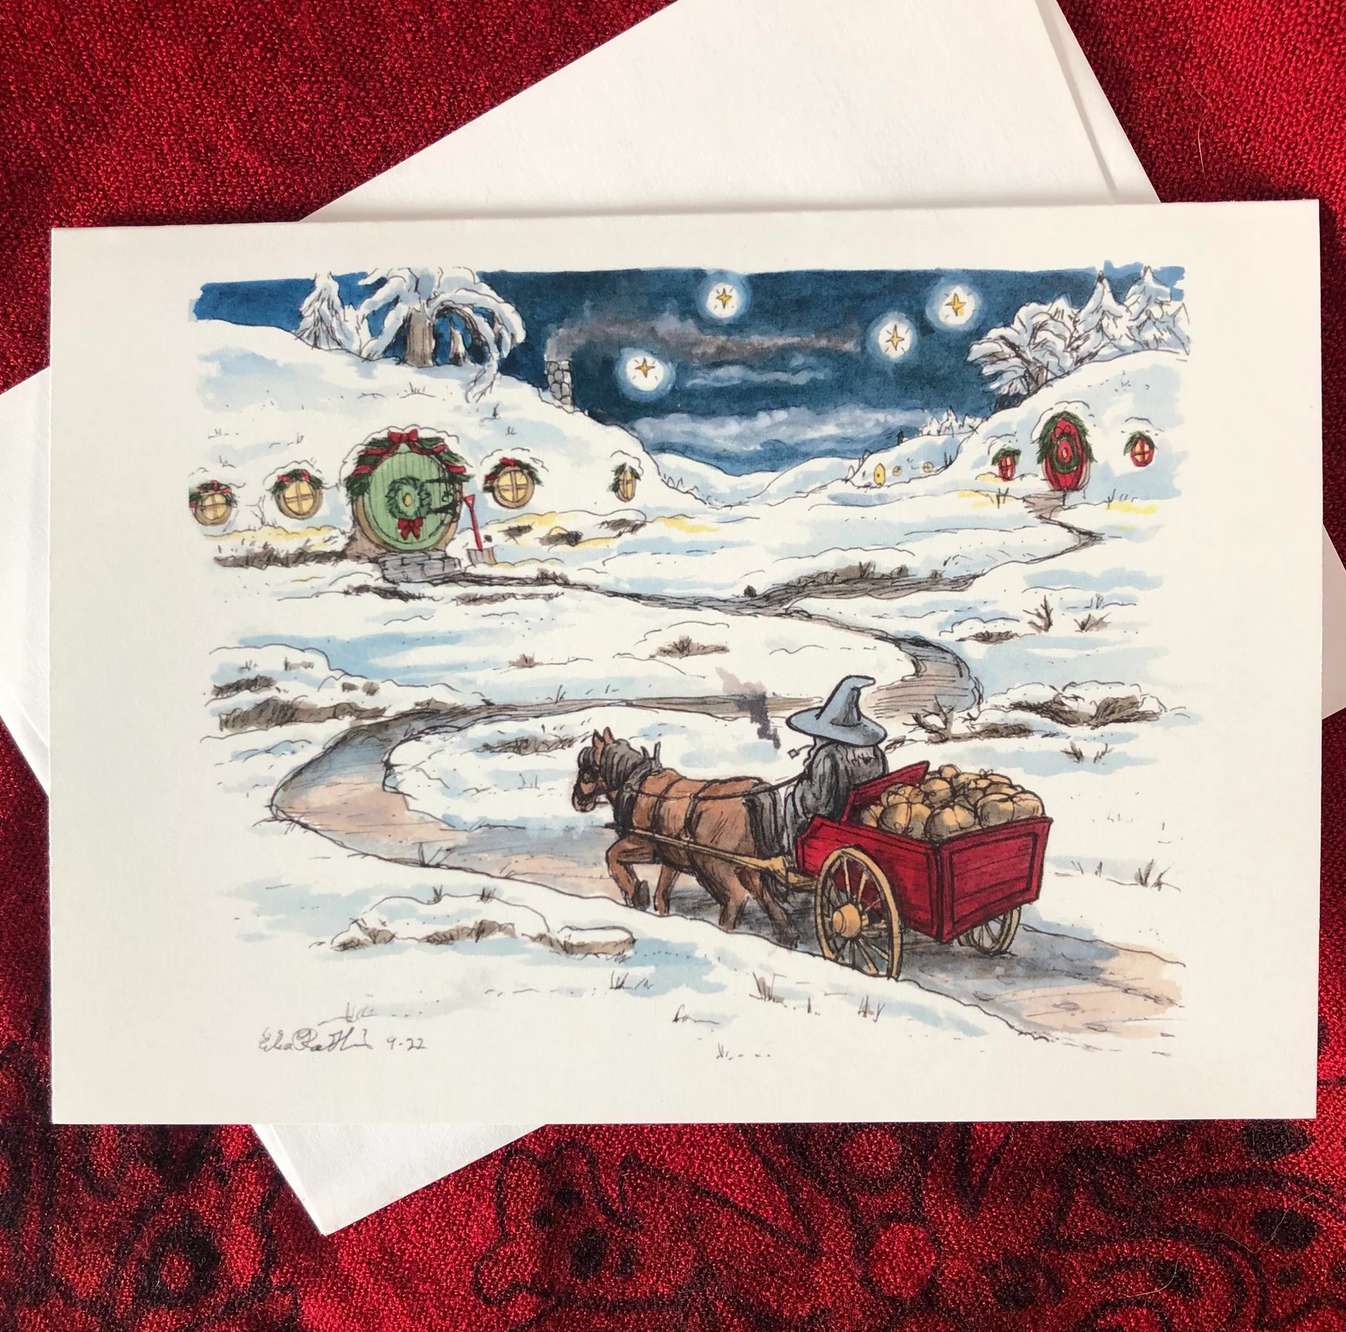 A holiday card featuring a beautiful watercolor and ink drawing of Gandalf showing up in the snow-covered Shire with a cartload of gifts. Hobbit holes have garlands on them, and warm lights from the windows welcome him for the celebration